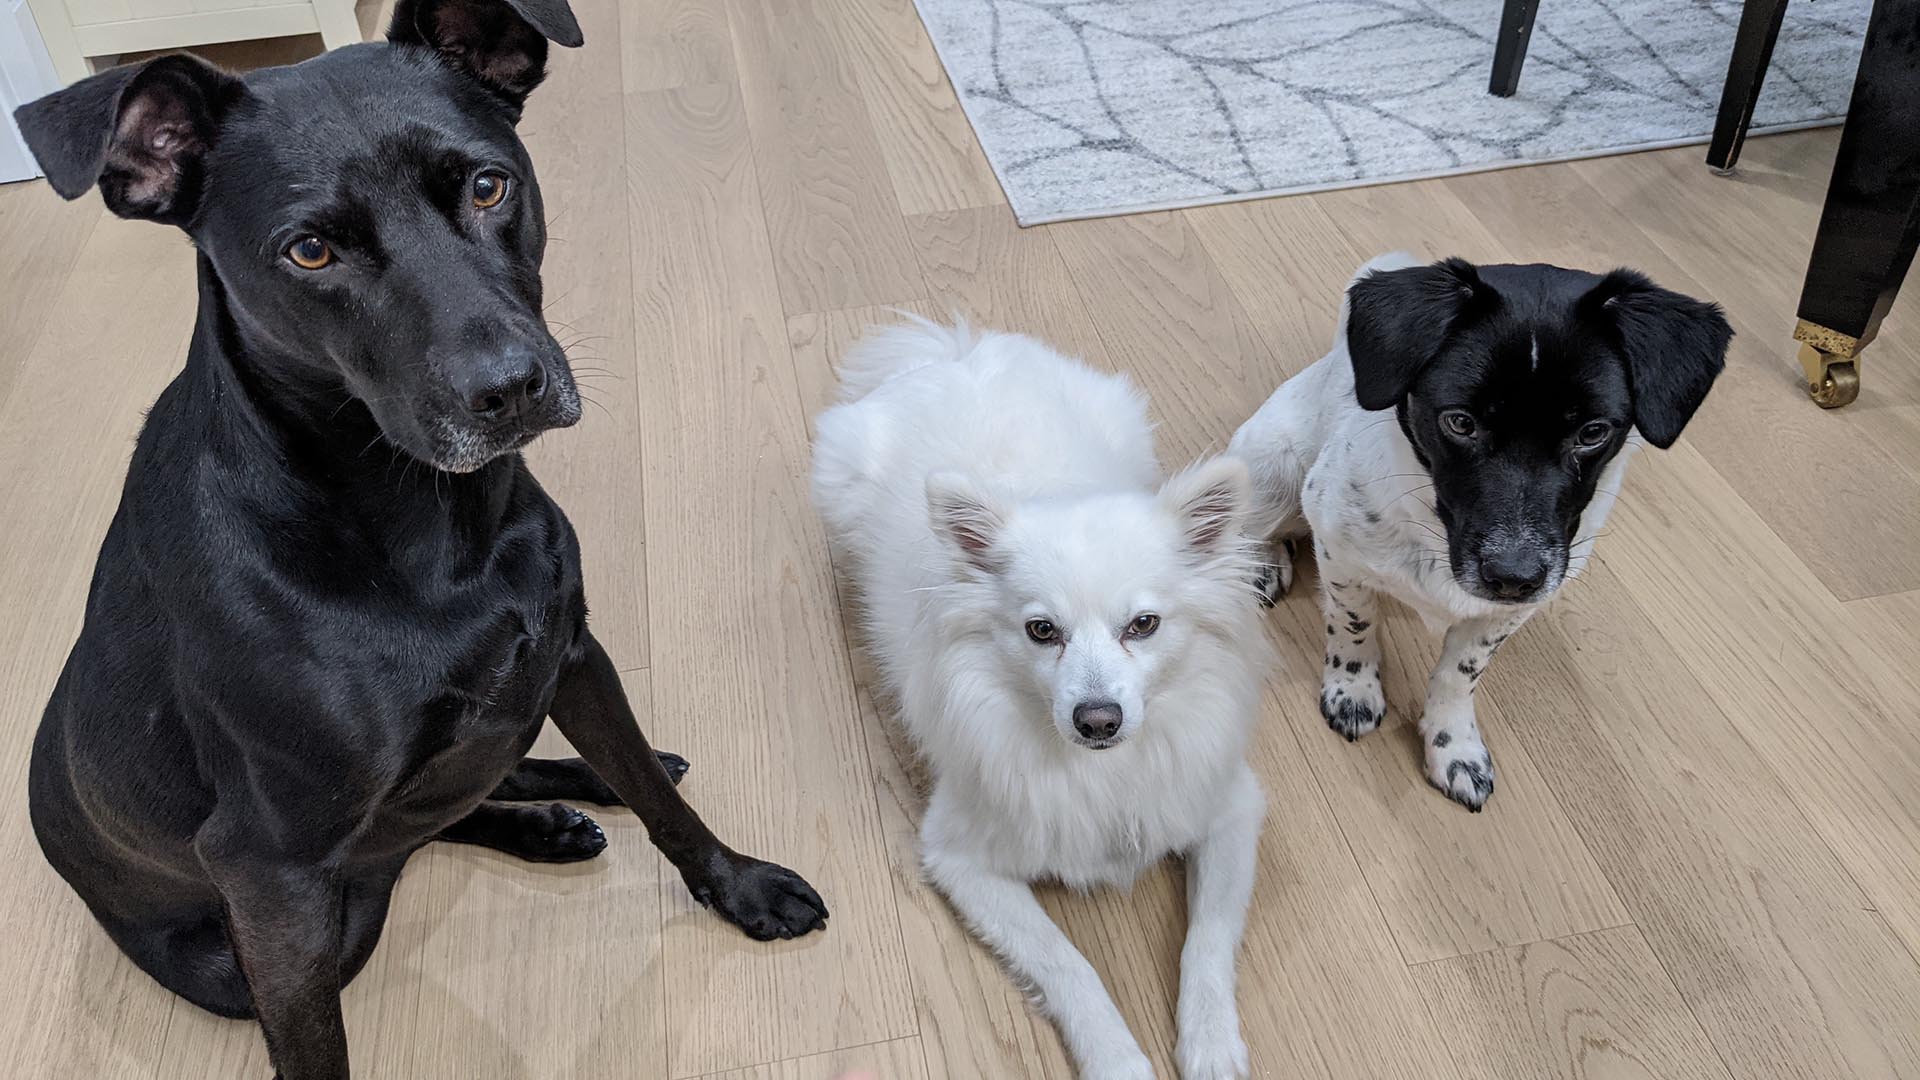 A close-up picture of Sansa, Casey, and Mali